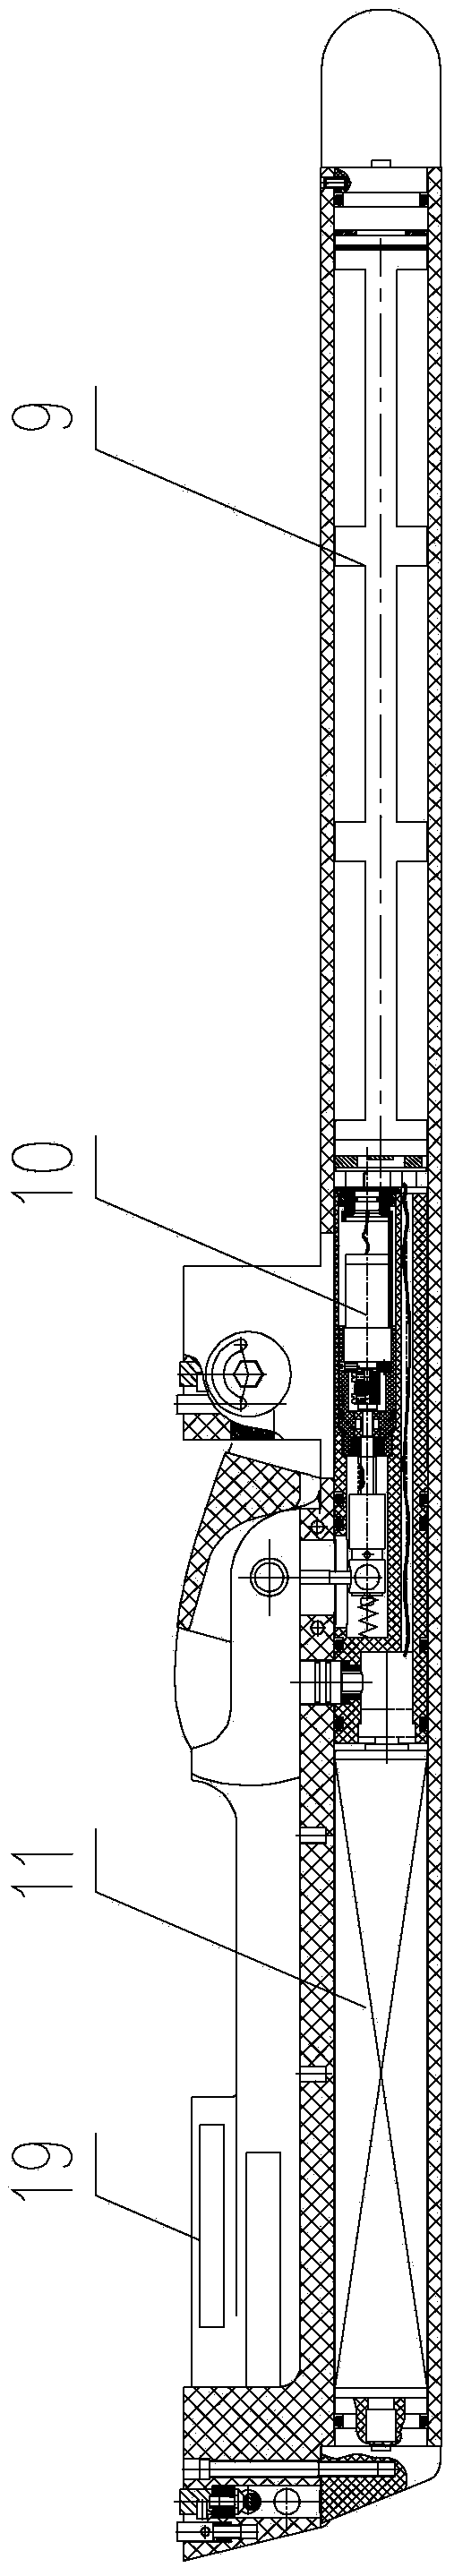 Automatic transverse control device for pulling cable array in ocean